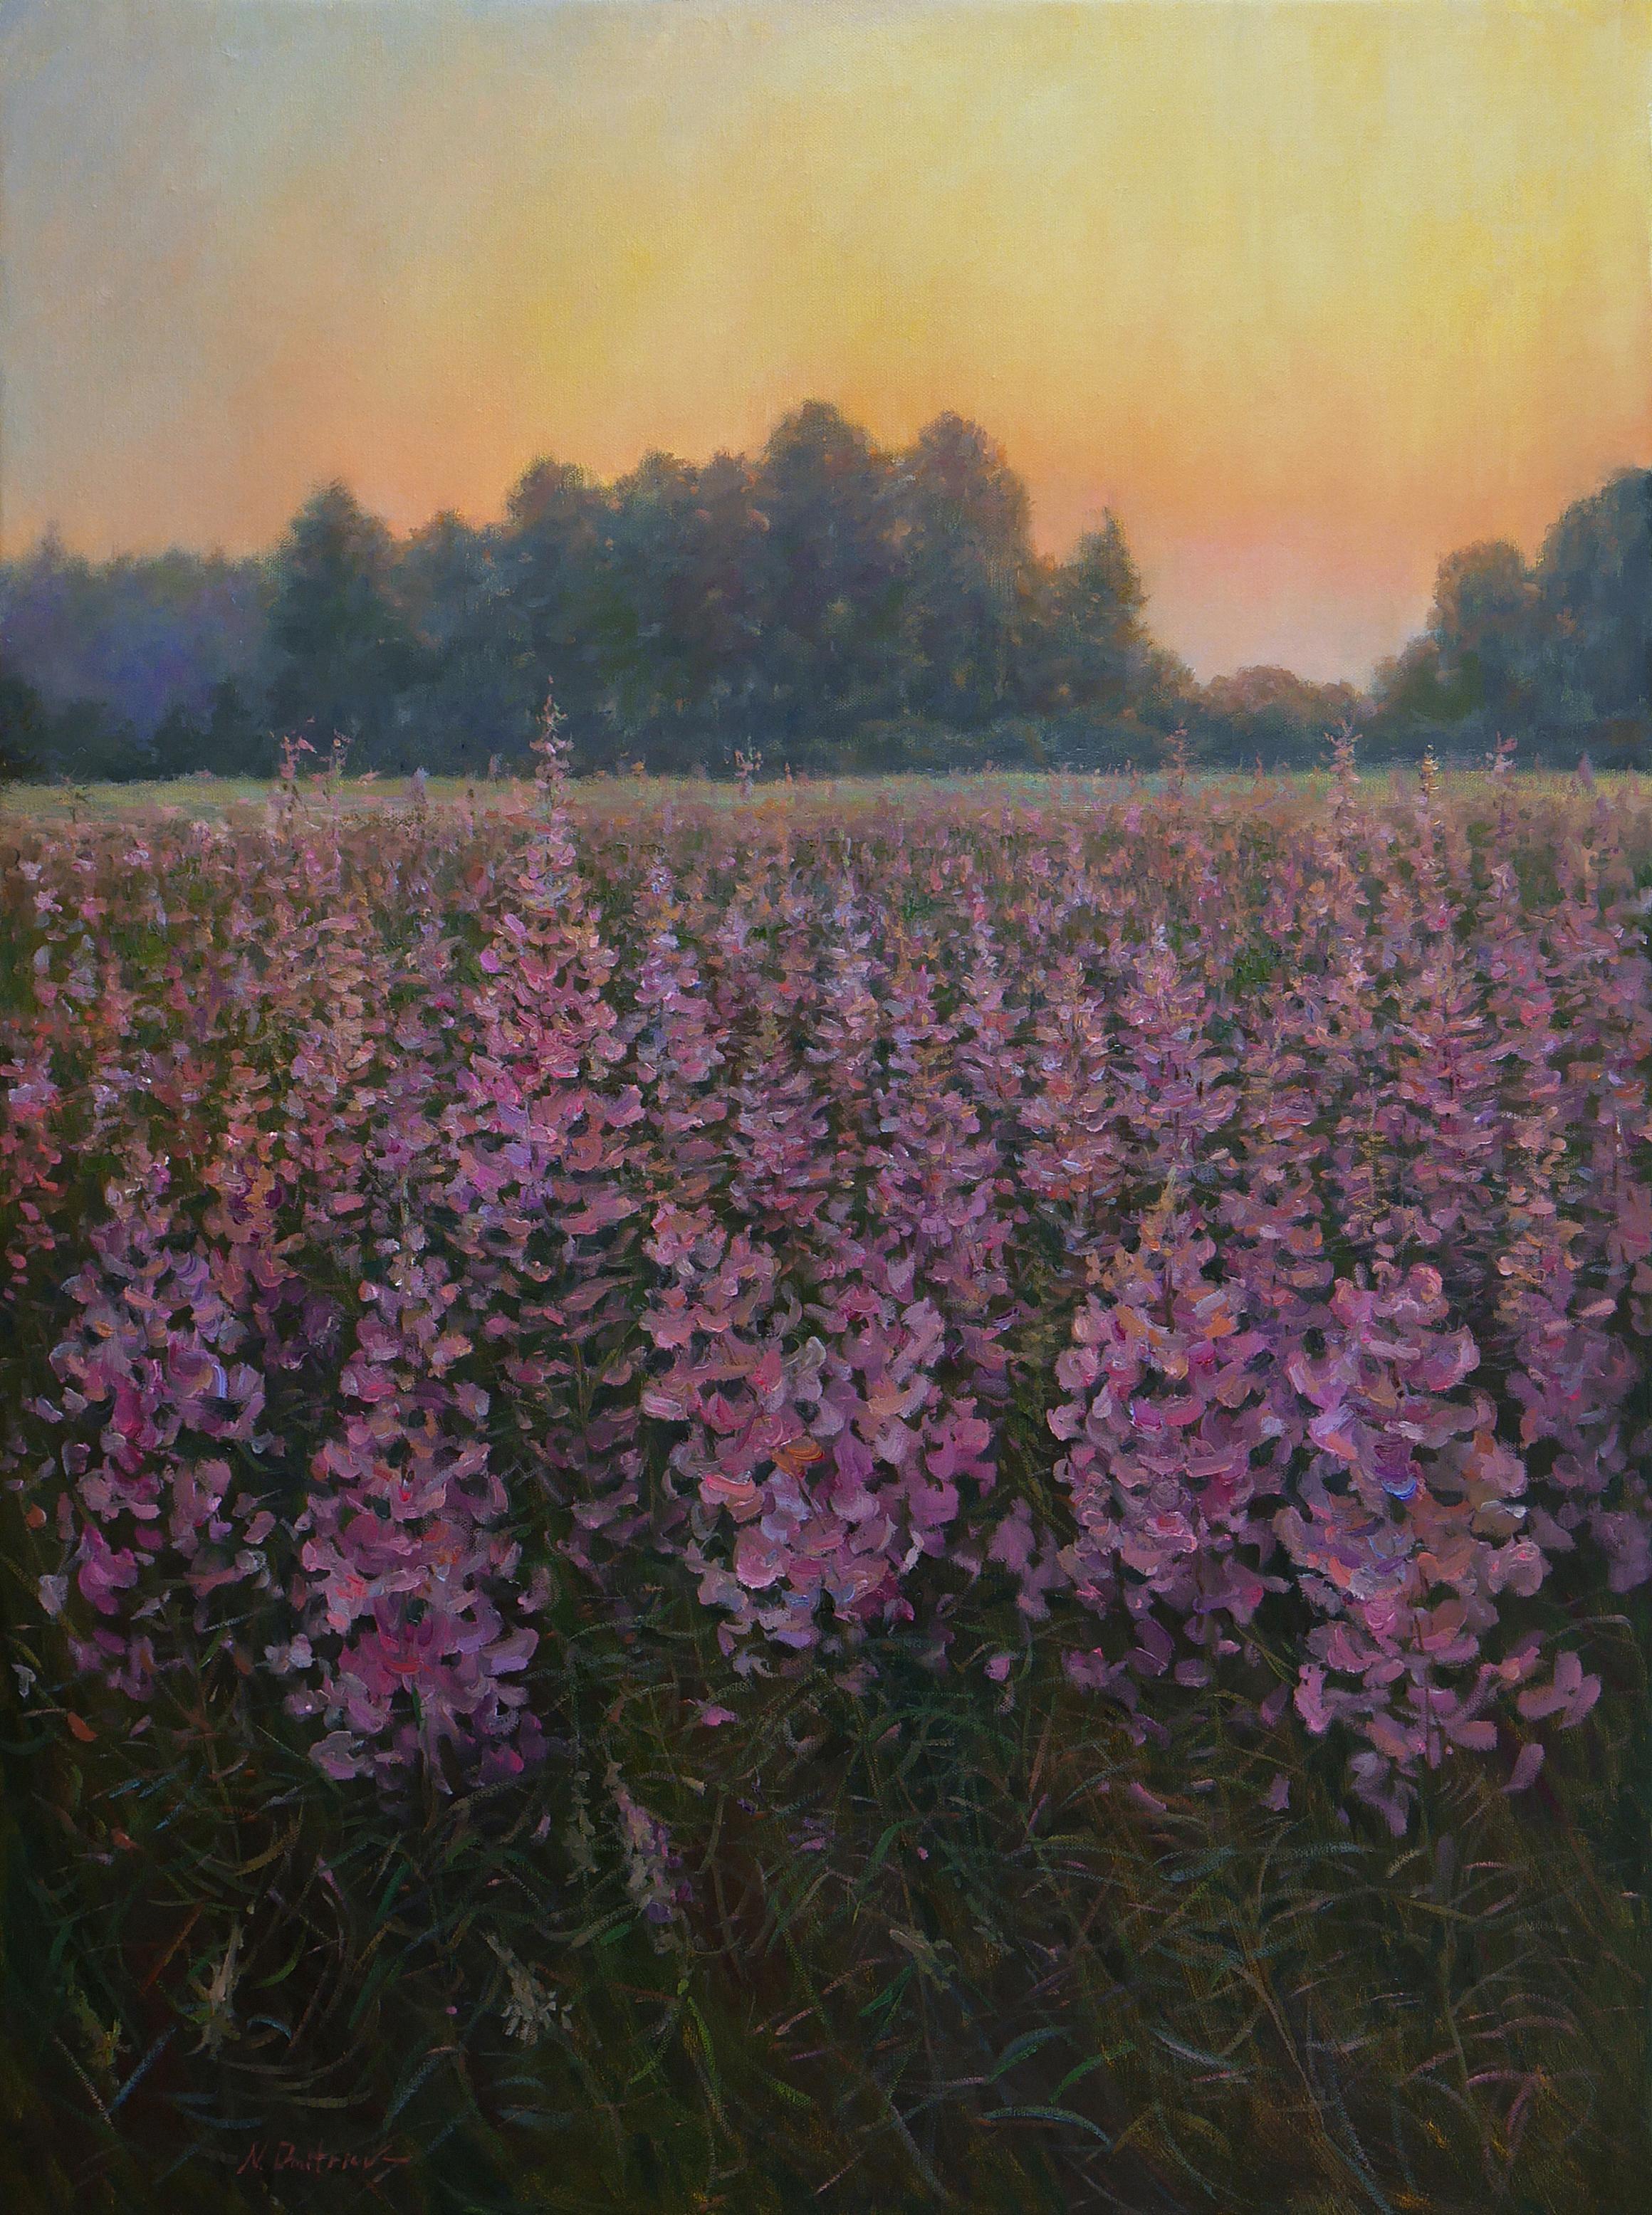 Nikolay Dmitriev Interior Painting - Sunset Over The Fireweed Field - sunset landscape painting